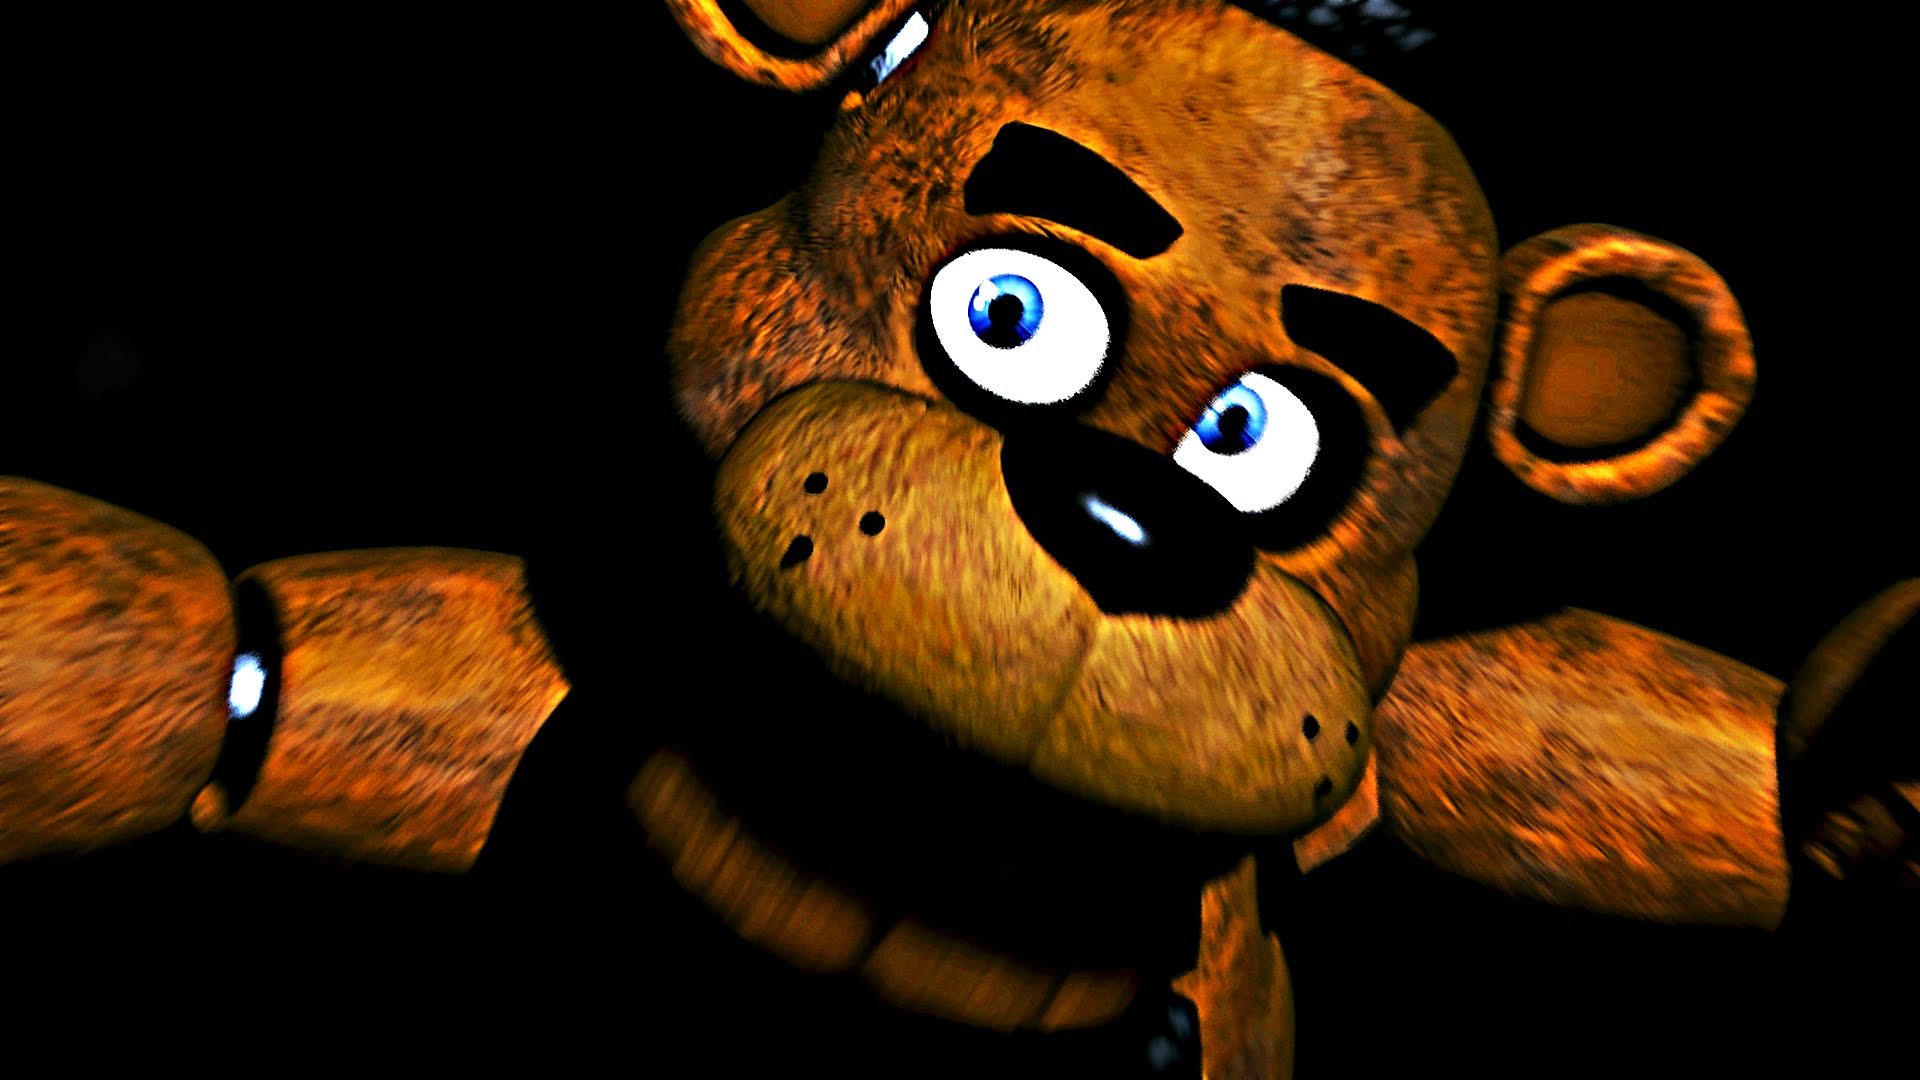 Five Nights at Freddy's quadrilogy lands on Xbox One